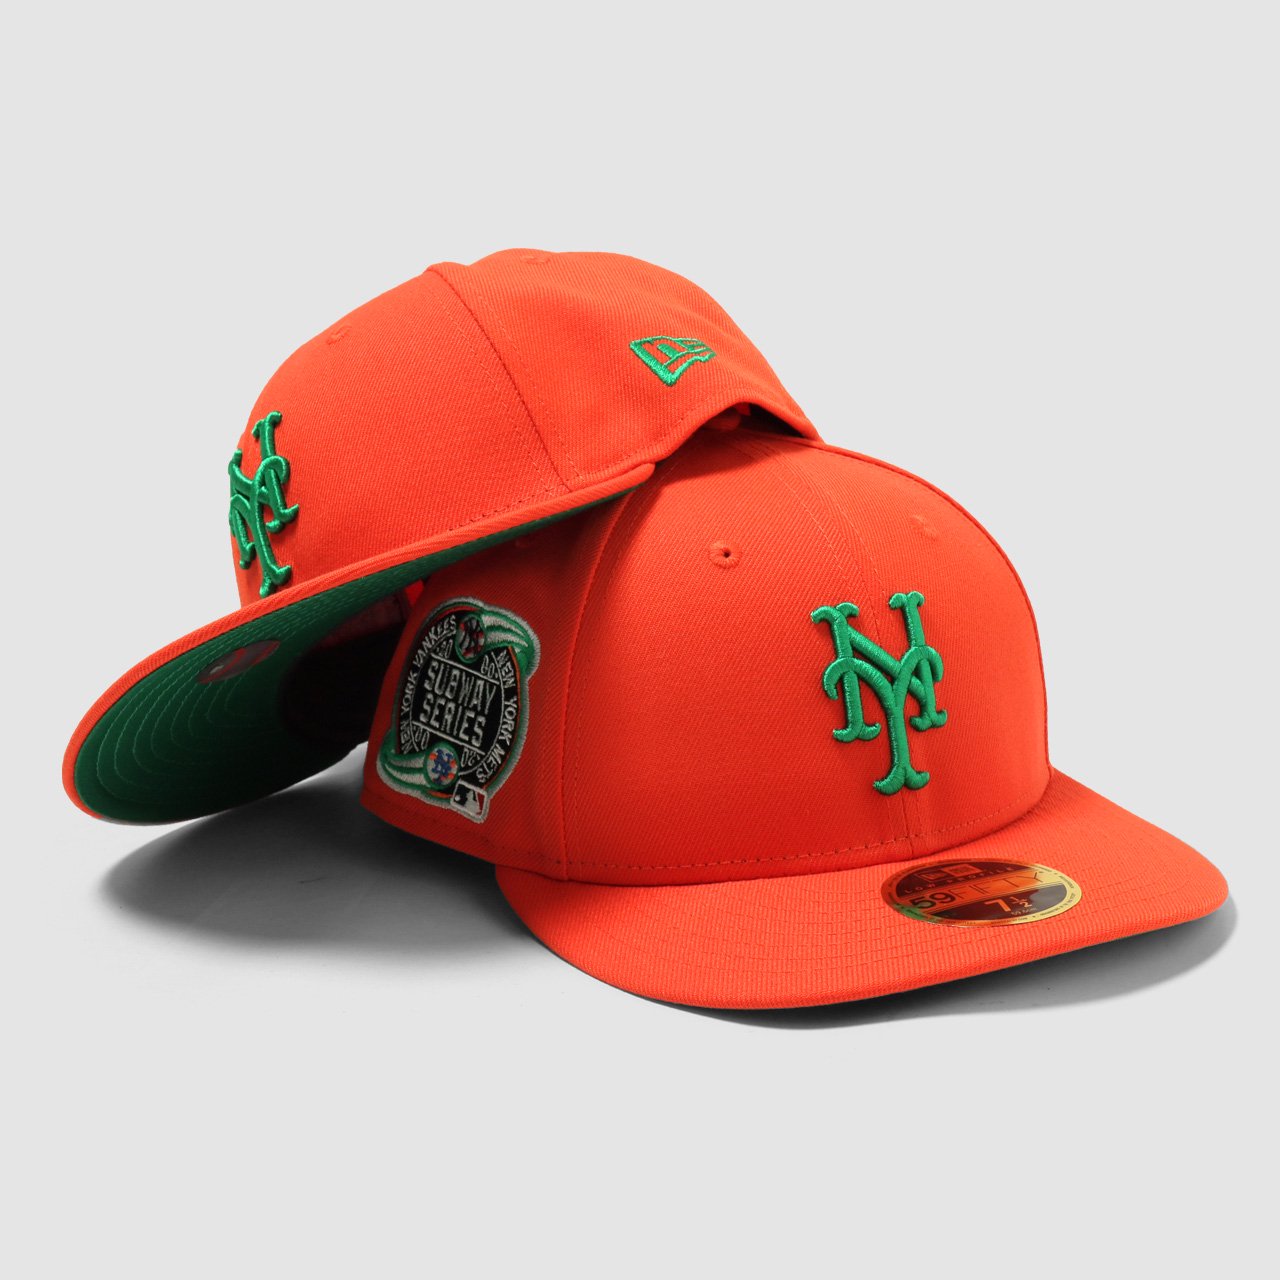 <img class='new_mark_img1' src='https://img.shop-pro.jp/img/new/icons21.gif' style='border:none;display:inline;margin:0px;padding:0px;width:auto;' />New York Mets Subway Series New Era Low Profile 59Fifty Cap Orange